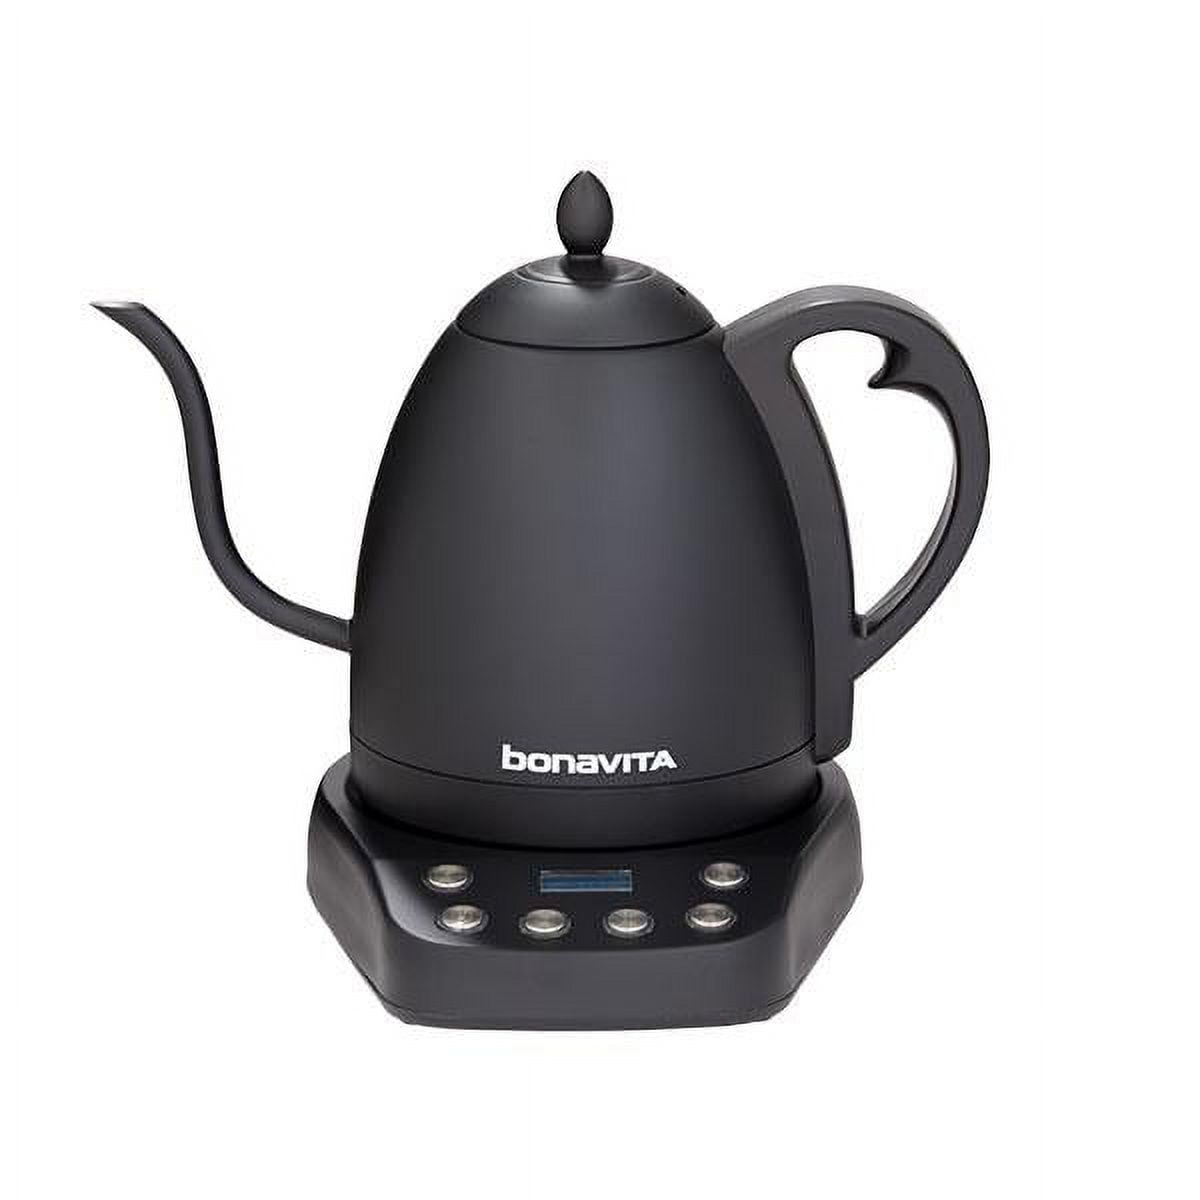 Savoy Electronic Kettle with Adjustable Temperature